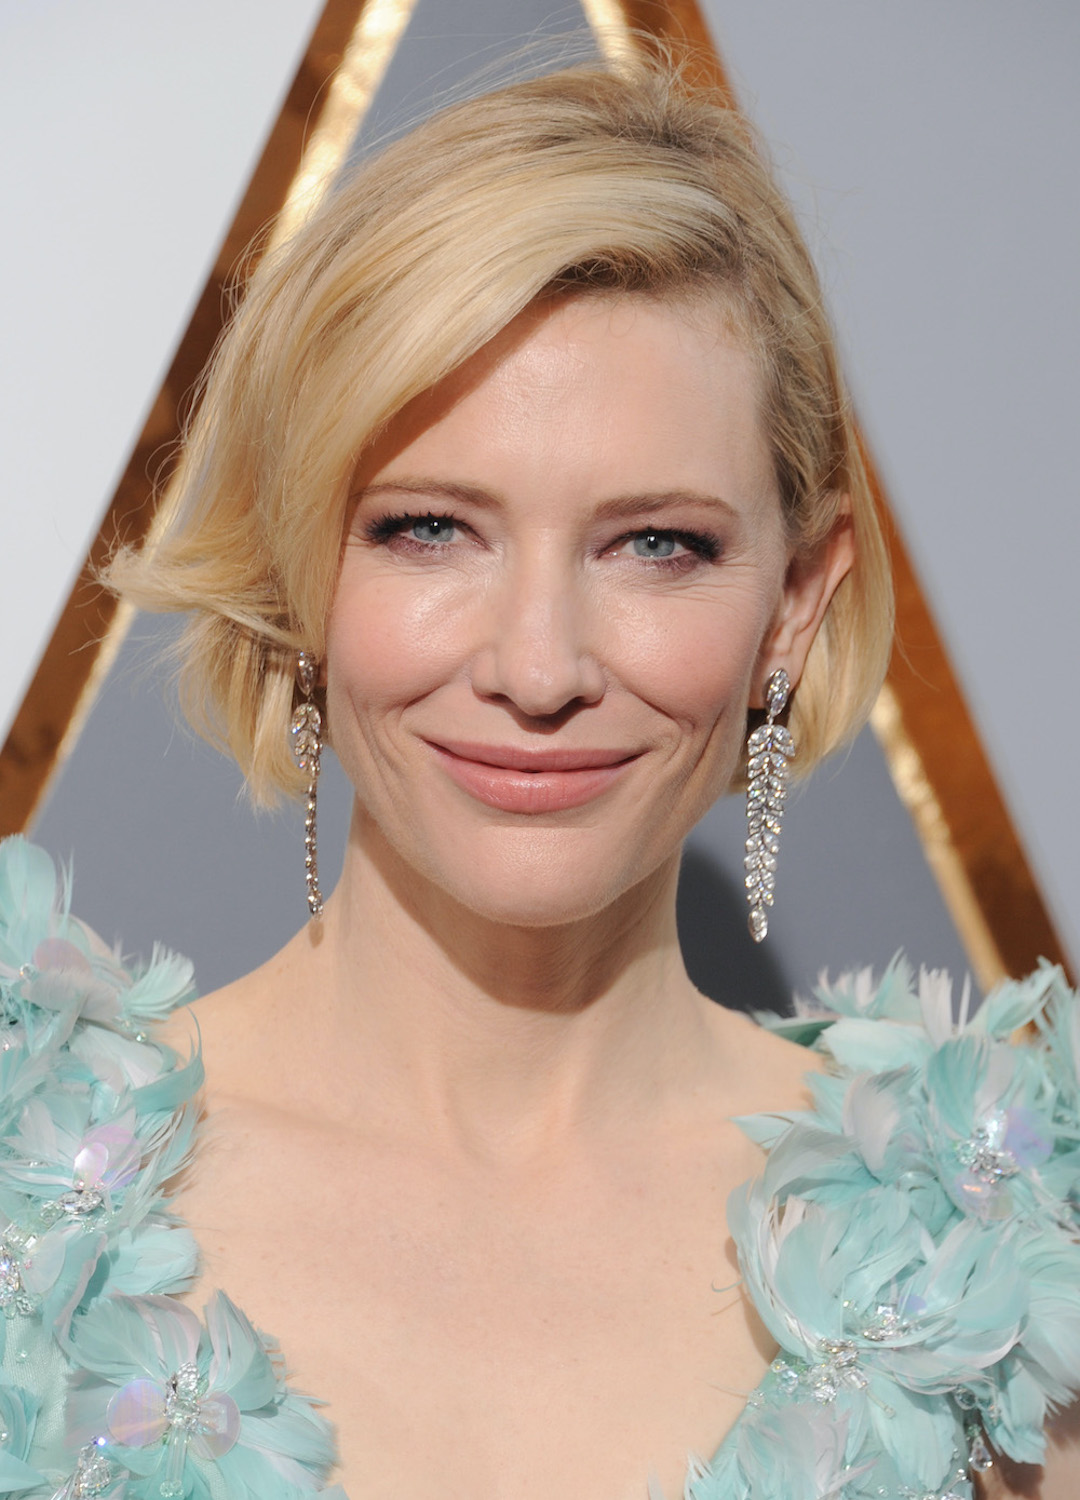 Cate Blanchett arrives at the 88th Annual Academy Awards at Hollywood & Highland Center on February 28, 2016 in Hollywood, California